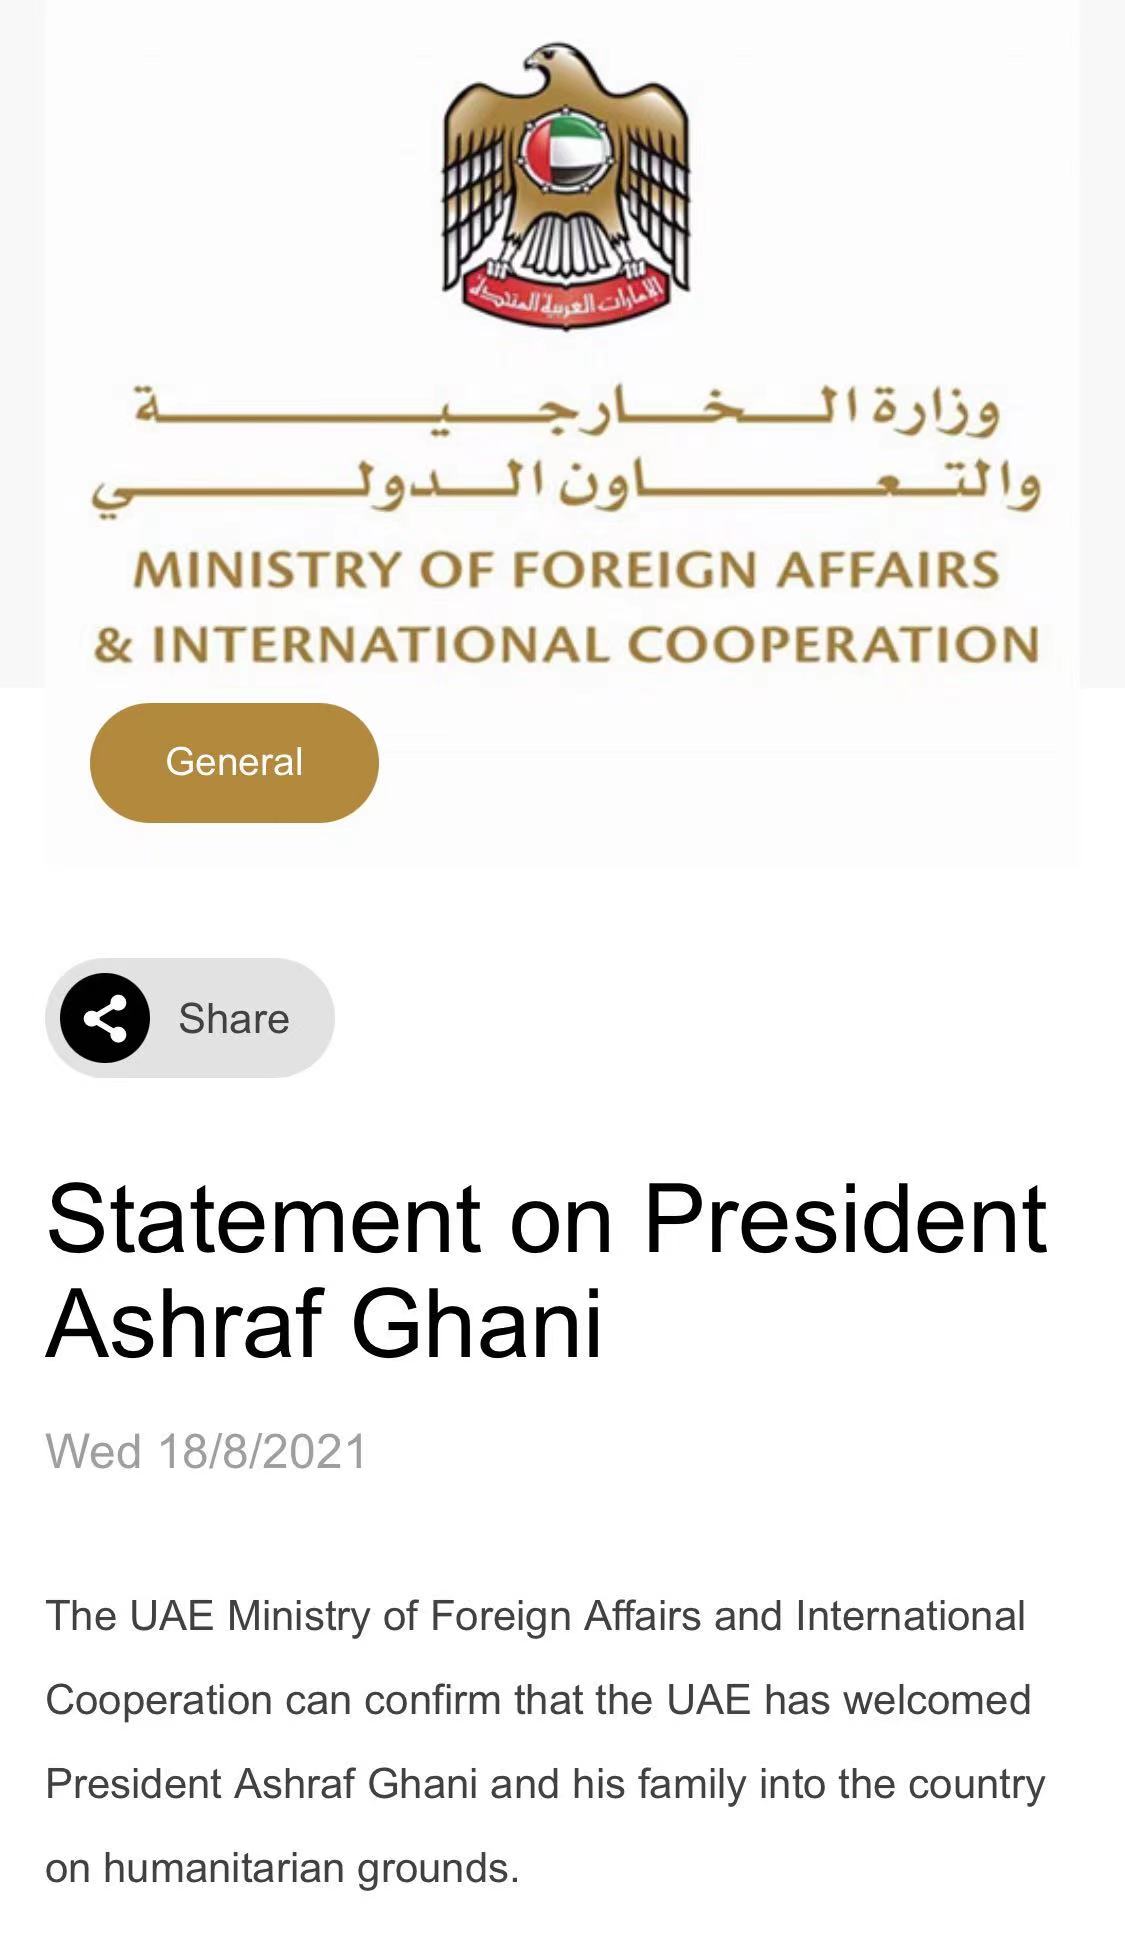 UAE Department of Foreign Affairs and International Cooperation: Accept Ghani and his family into the country